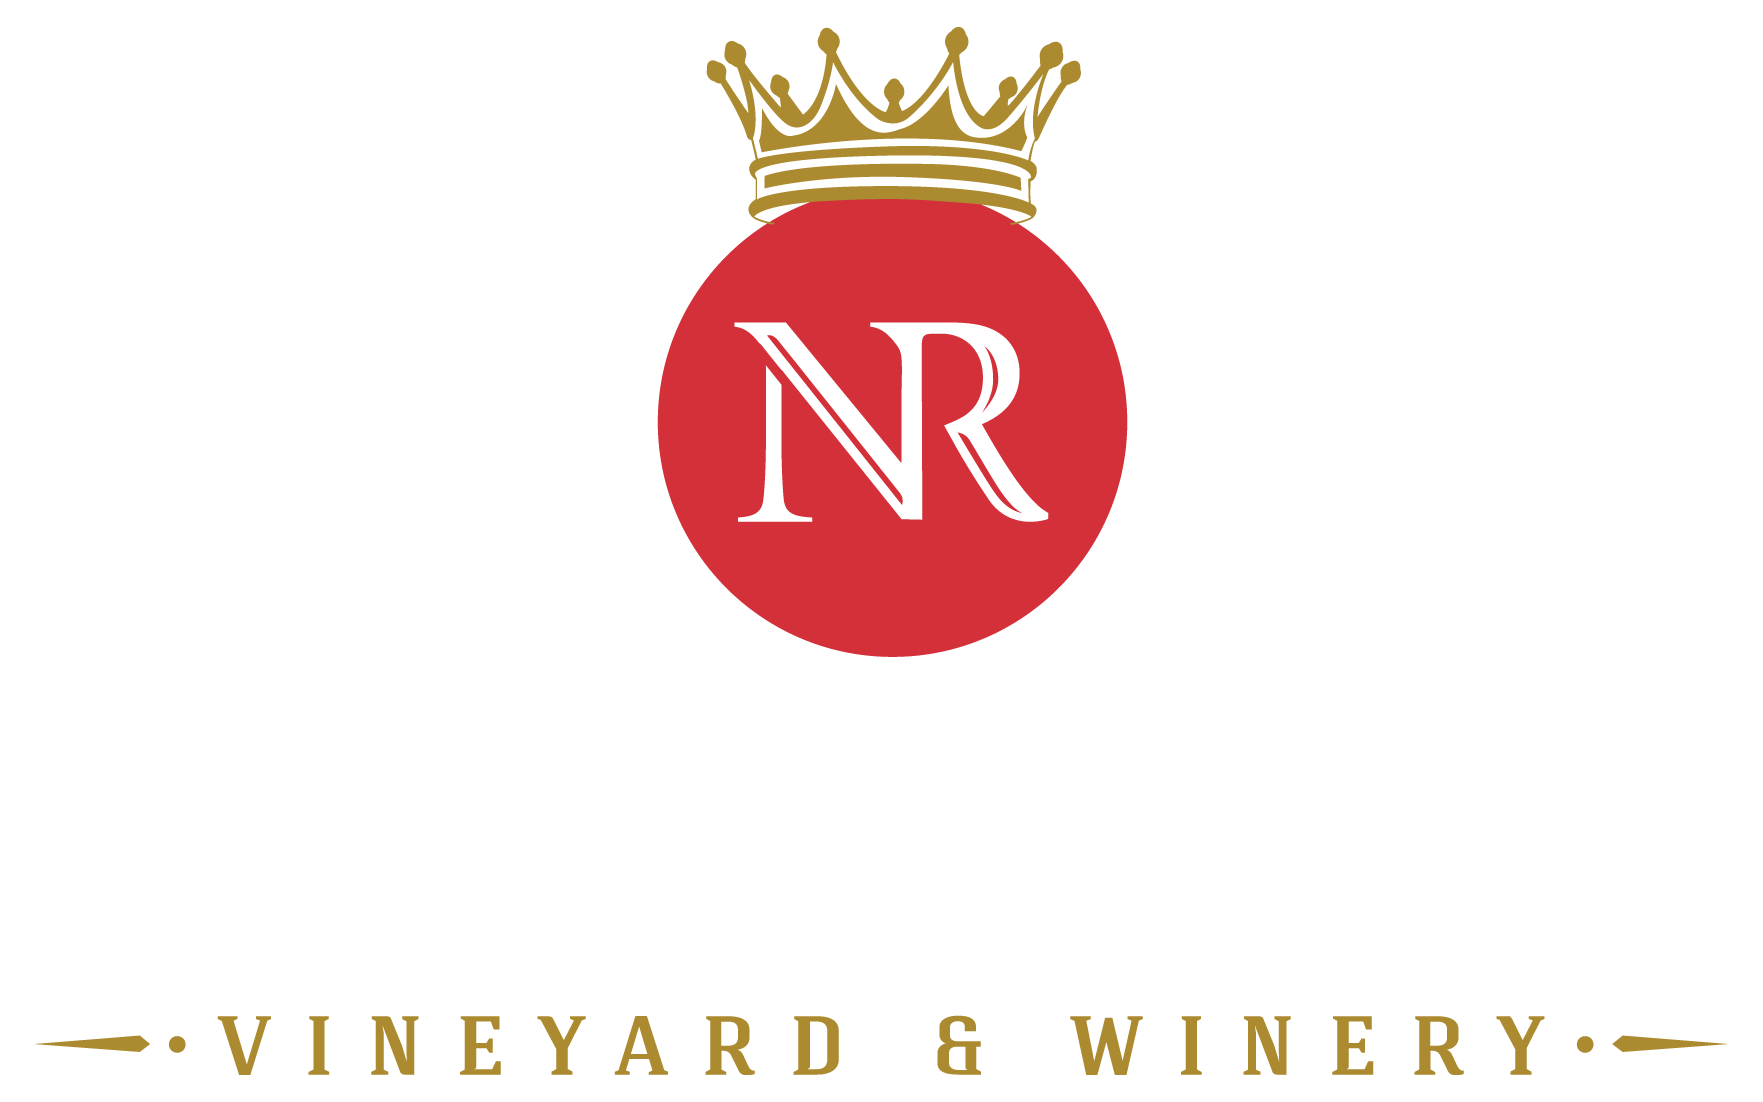 Noble Ridge Vineyards & Winery Scrolled light version of the logo (Link to homepage)